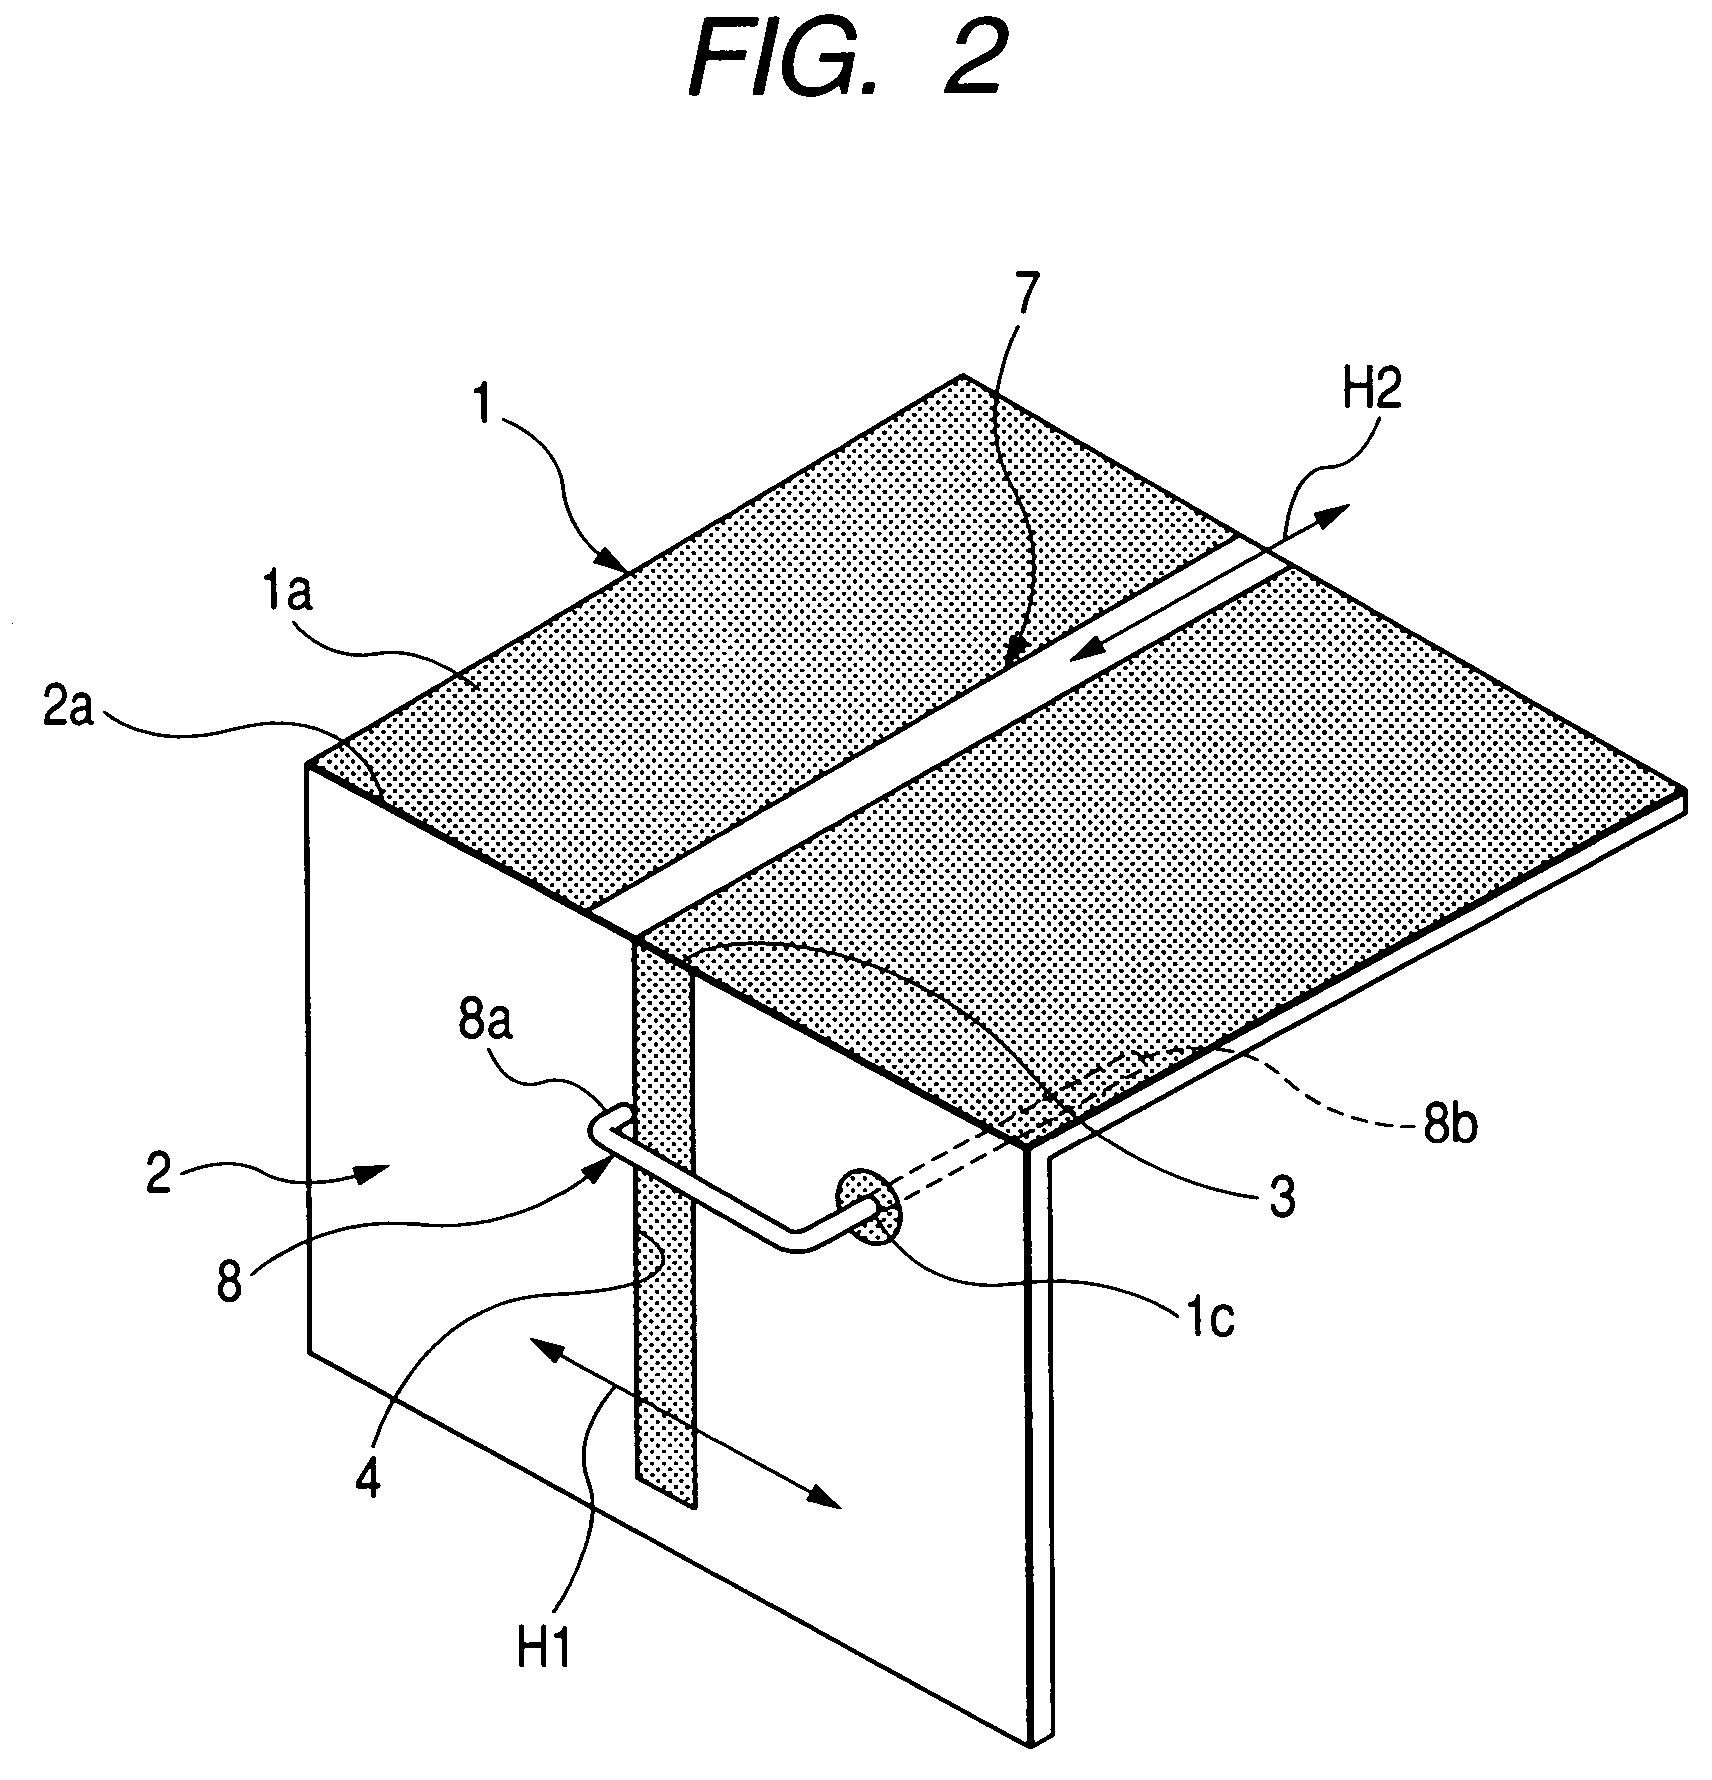 Antenna device having radiation characteristics suitable for ultrawideband communications